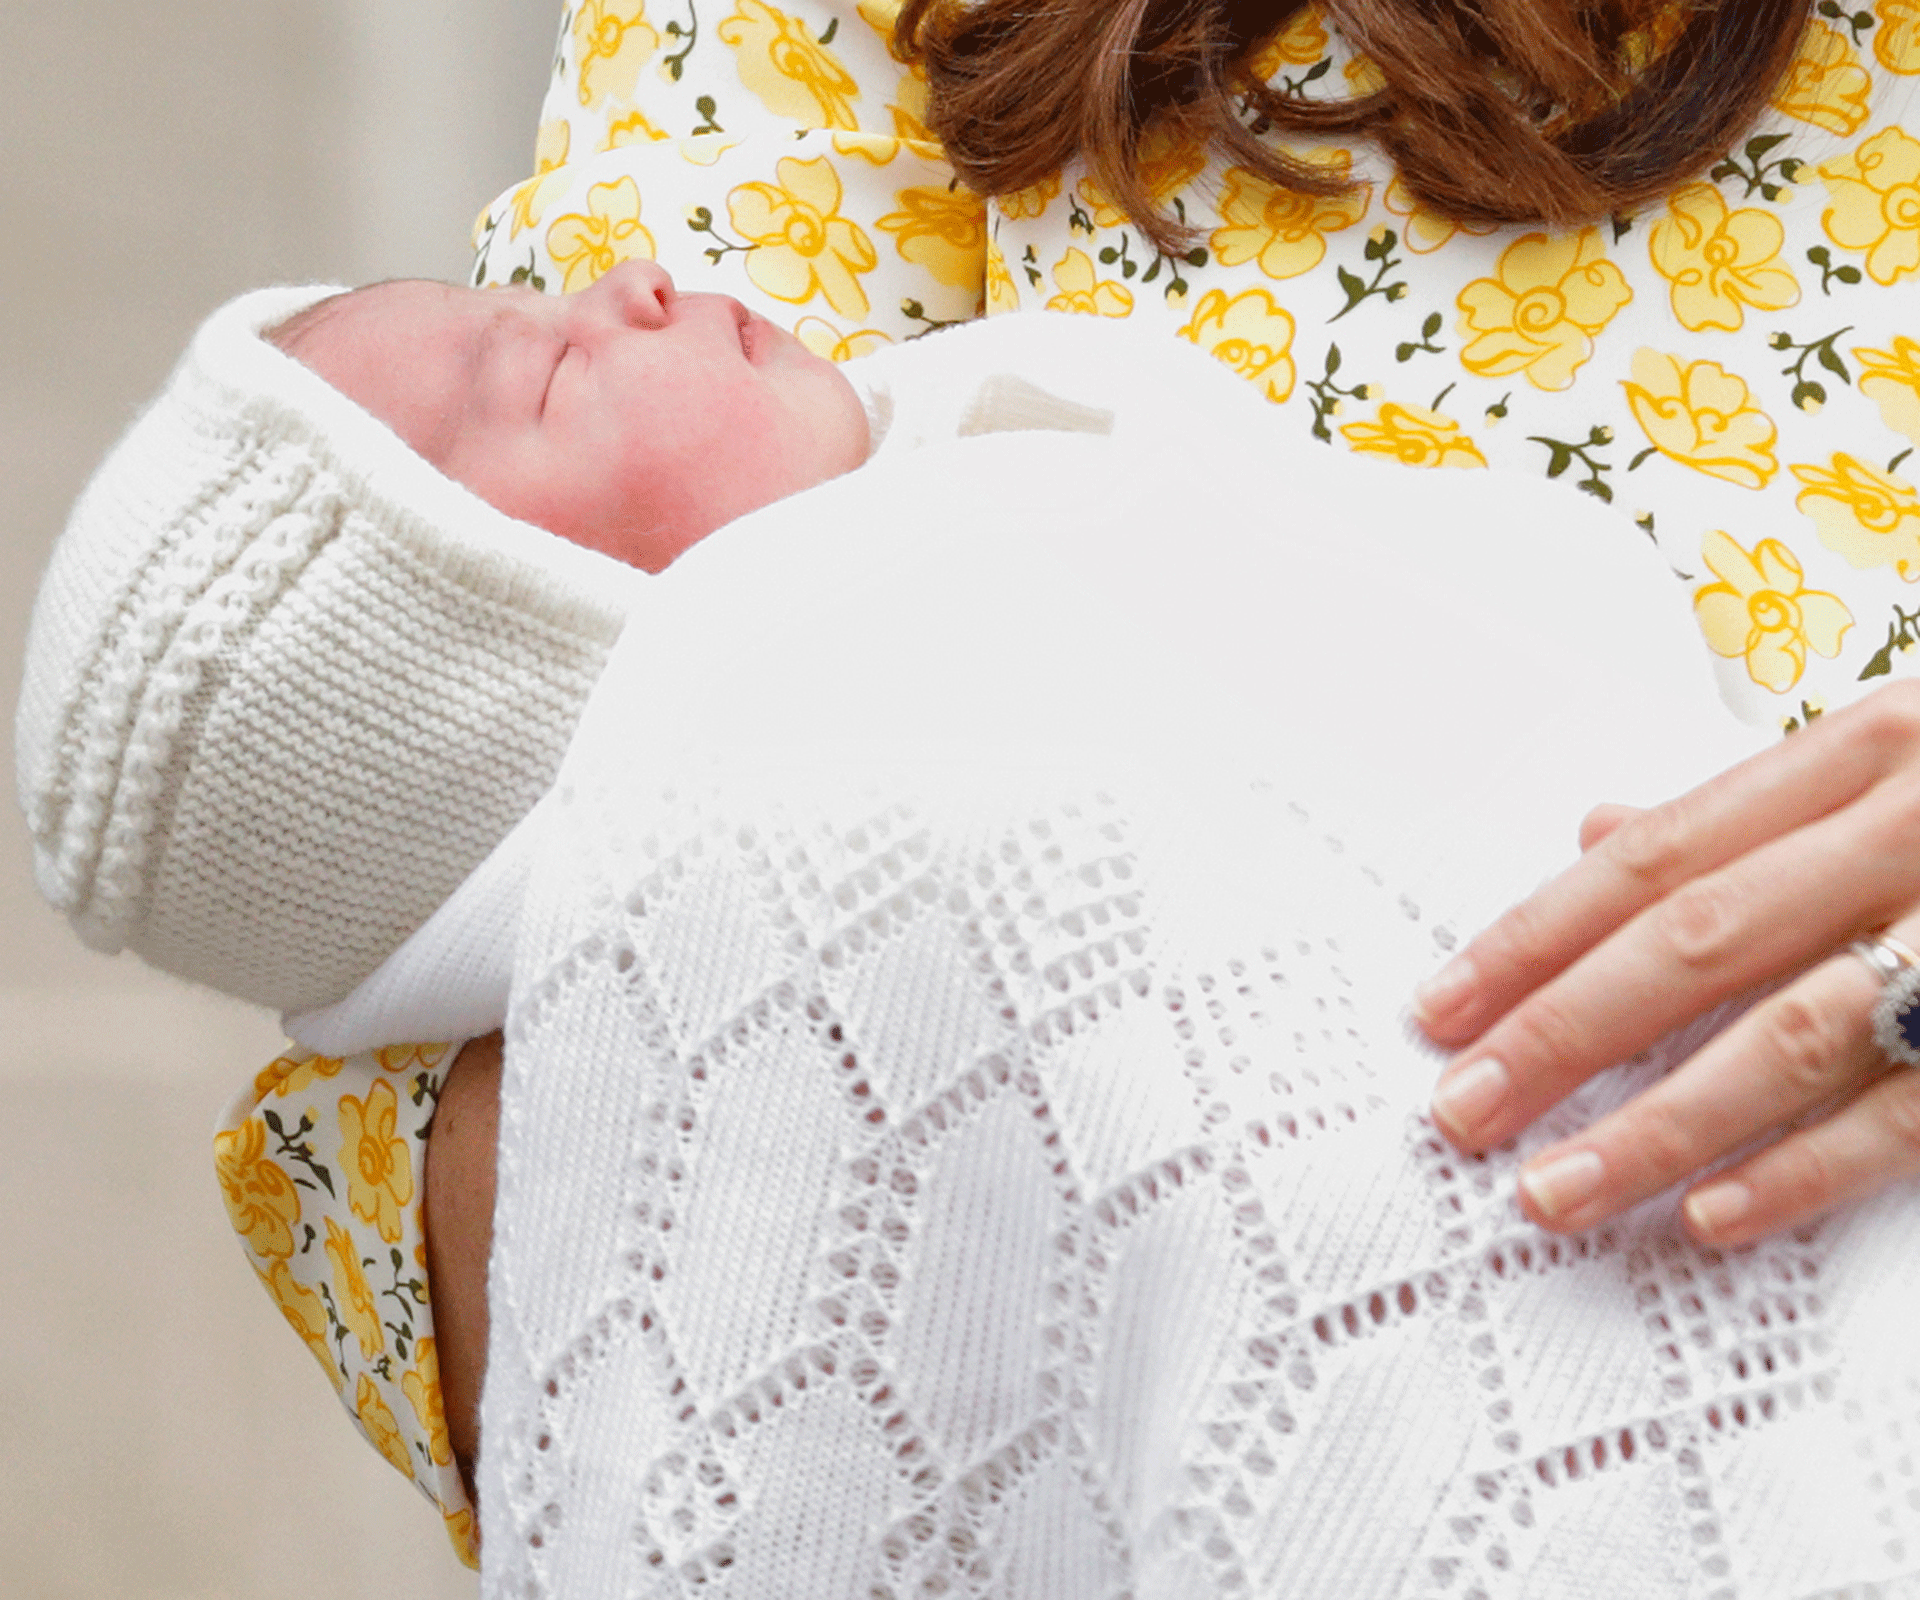 Princess Charlotte Elizabeth Diana of Cambridge: the name that took the world’s breath away